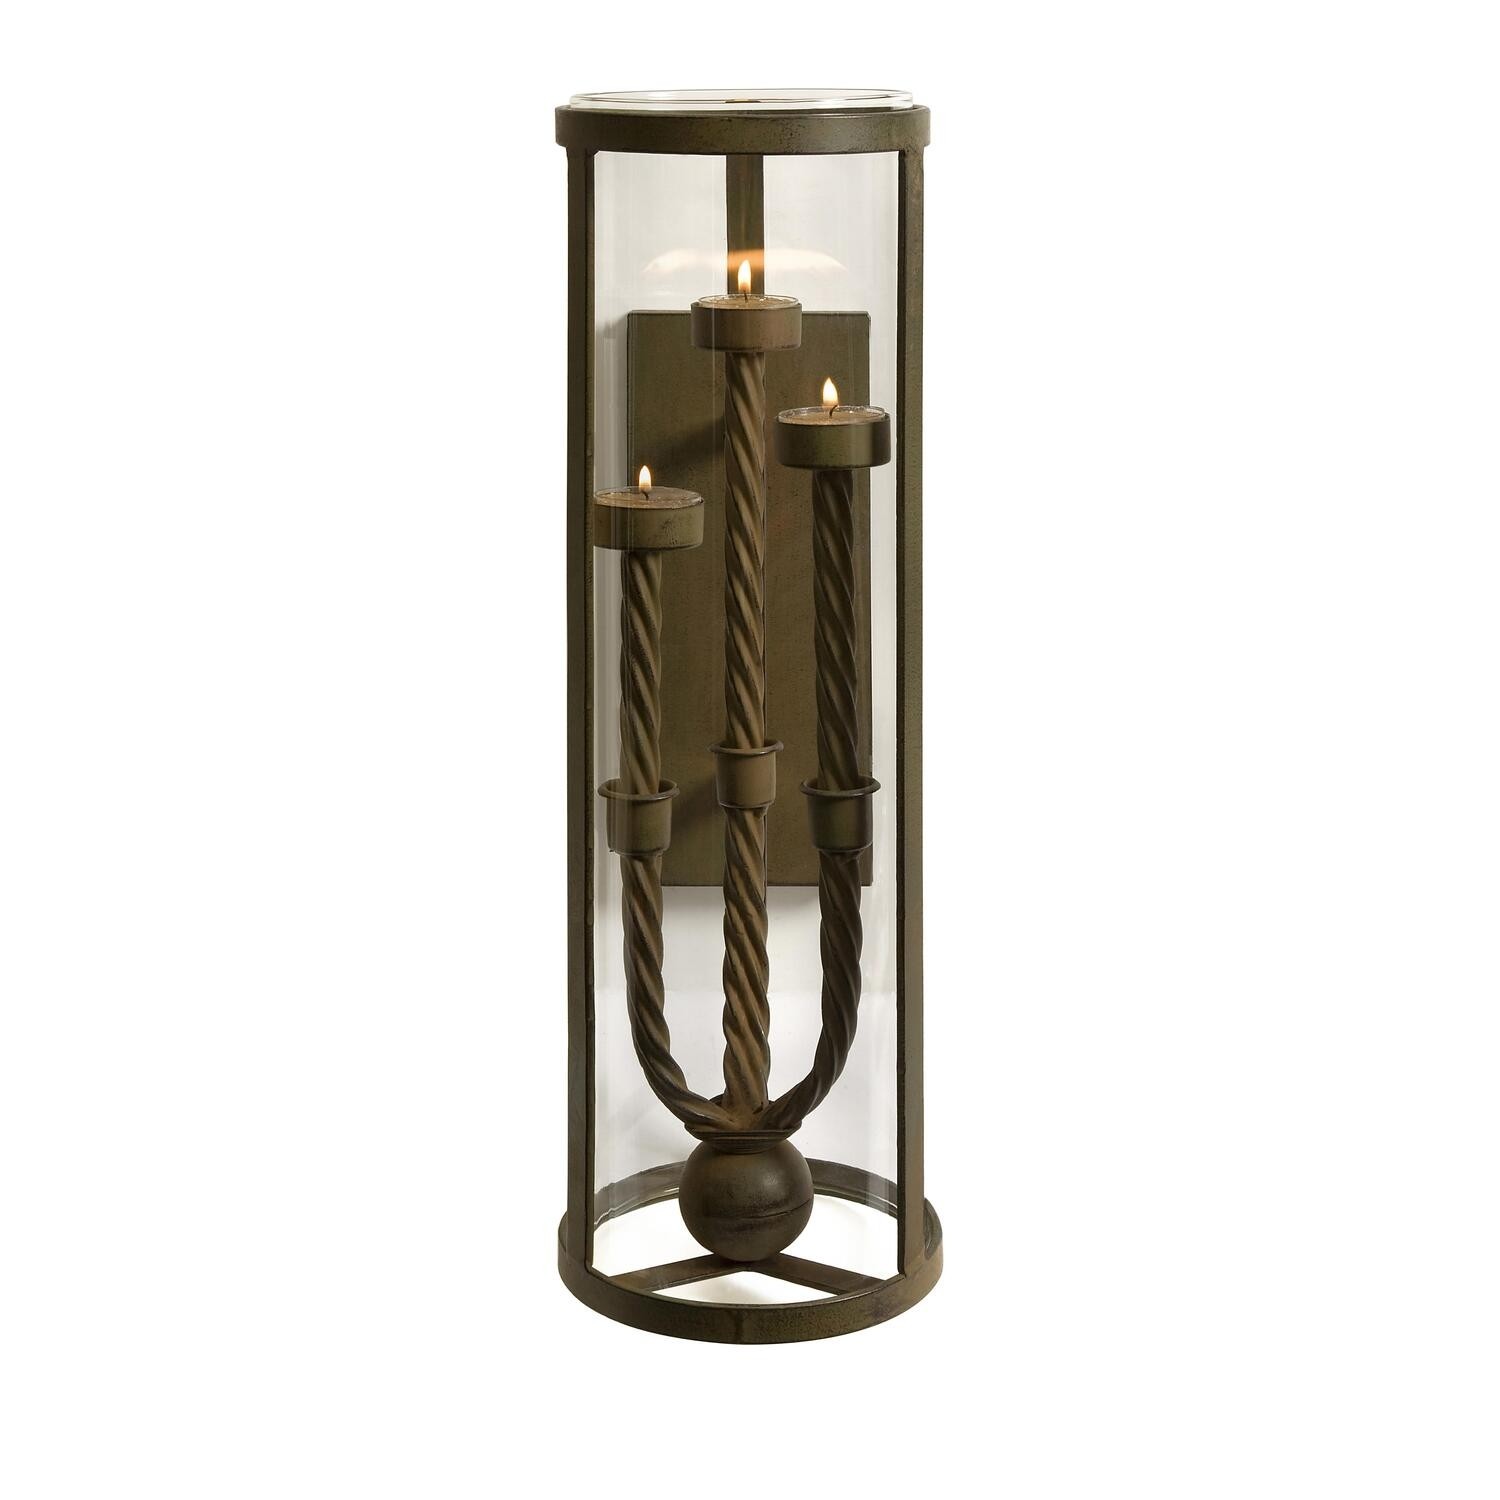 Wrought iron hurricane candle holders 4